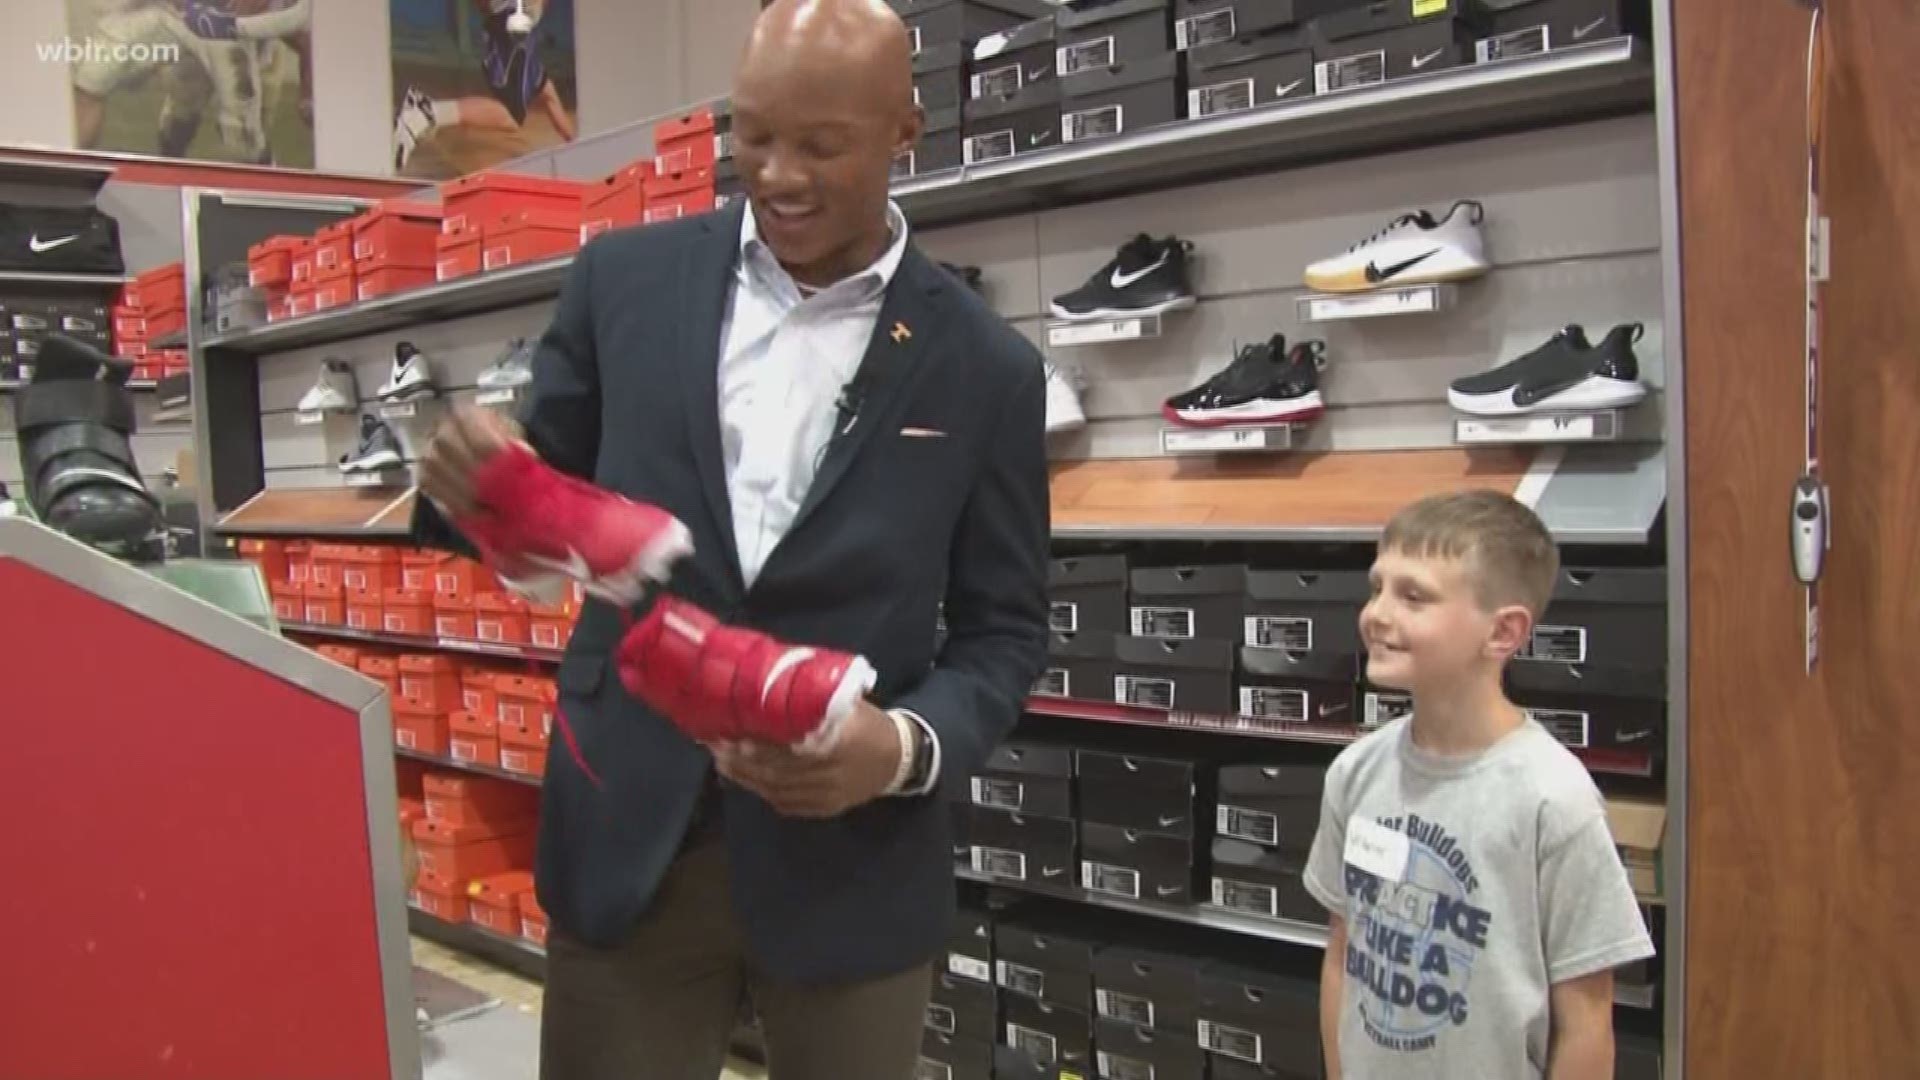 VFL and Pittsburgh Steelers quarterback Josh Dobbs was in town this weekend for his football camp, and 10 lucky kids got to join him on a shopping spree.